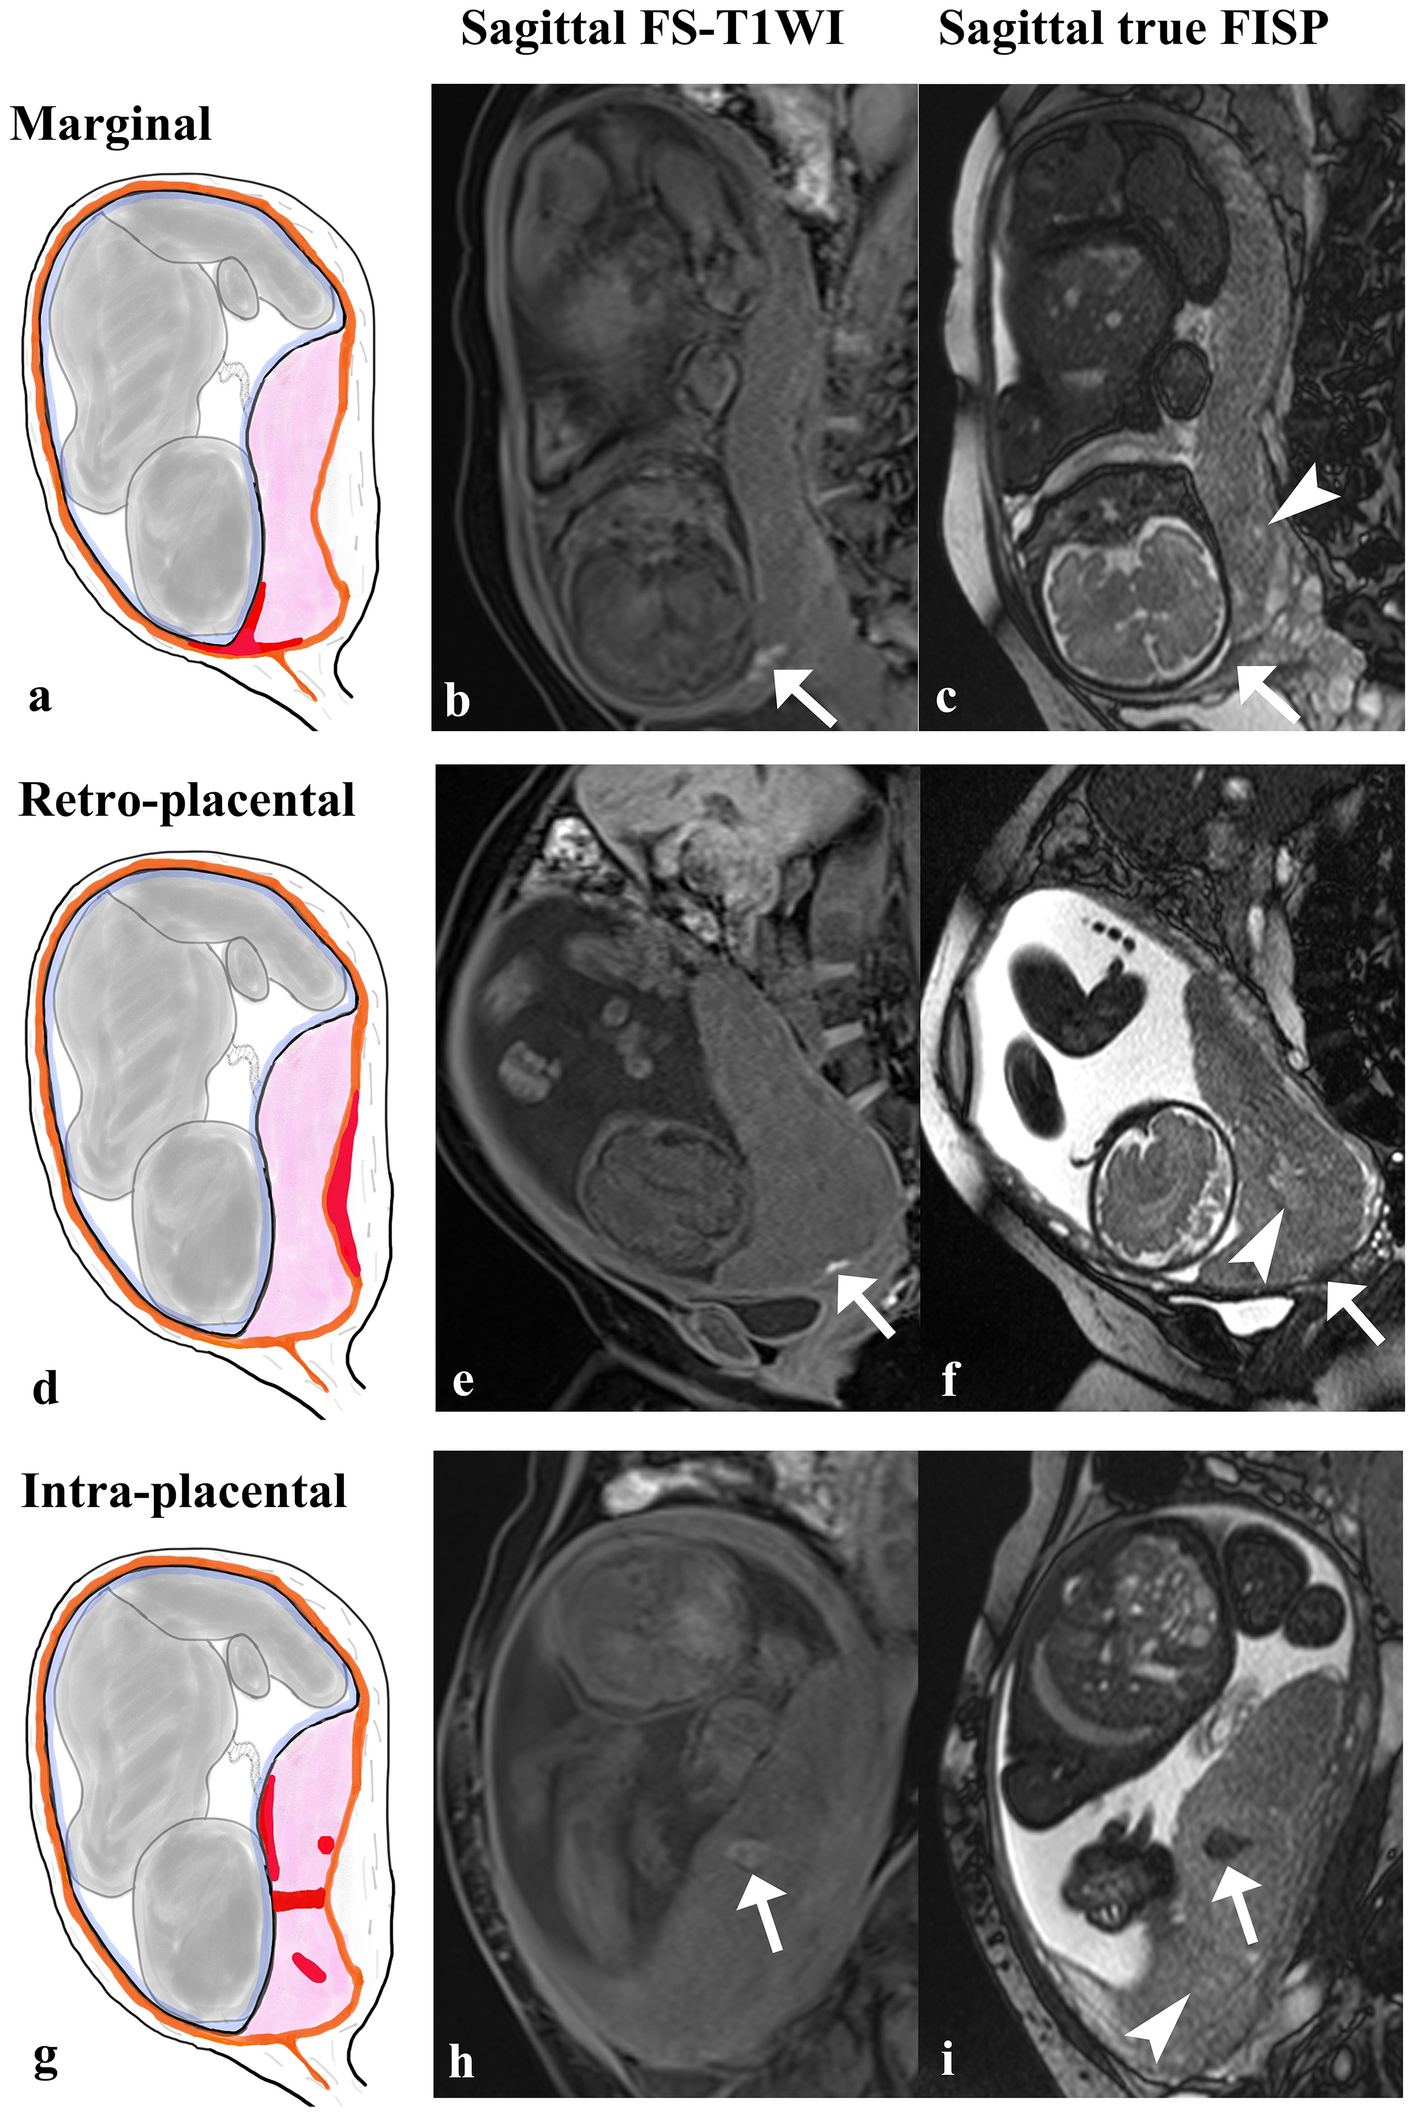 Prediction of antenatal bleeding and preterm deliveries using placental magnetic resonance imaging in patients with placenta previa